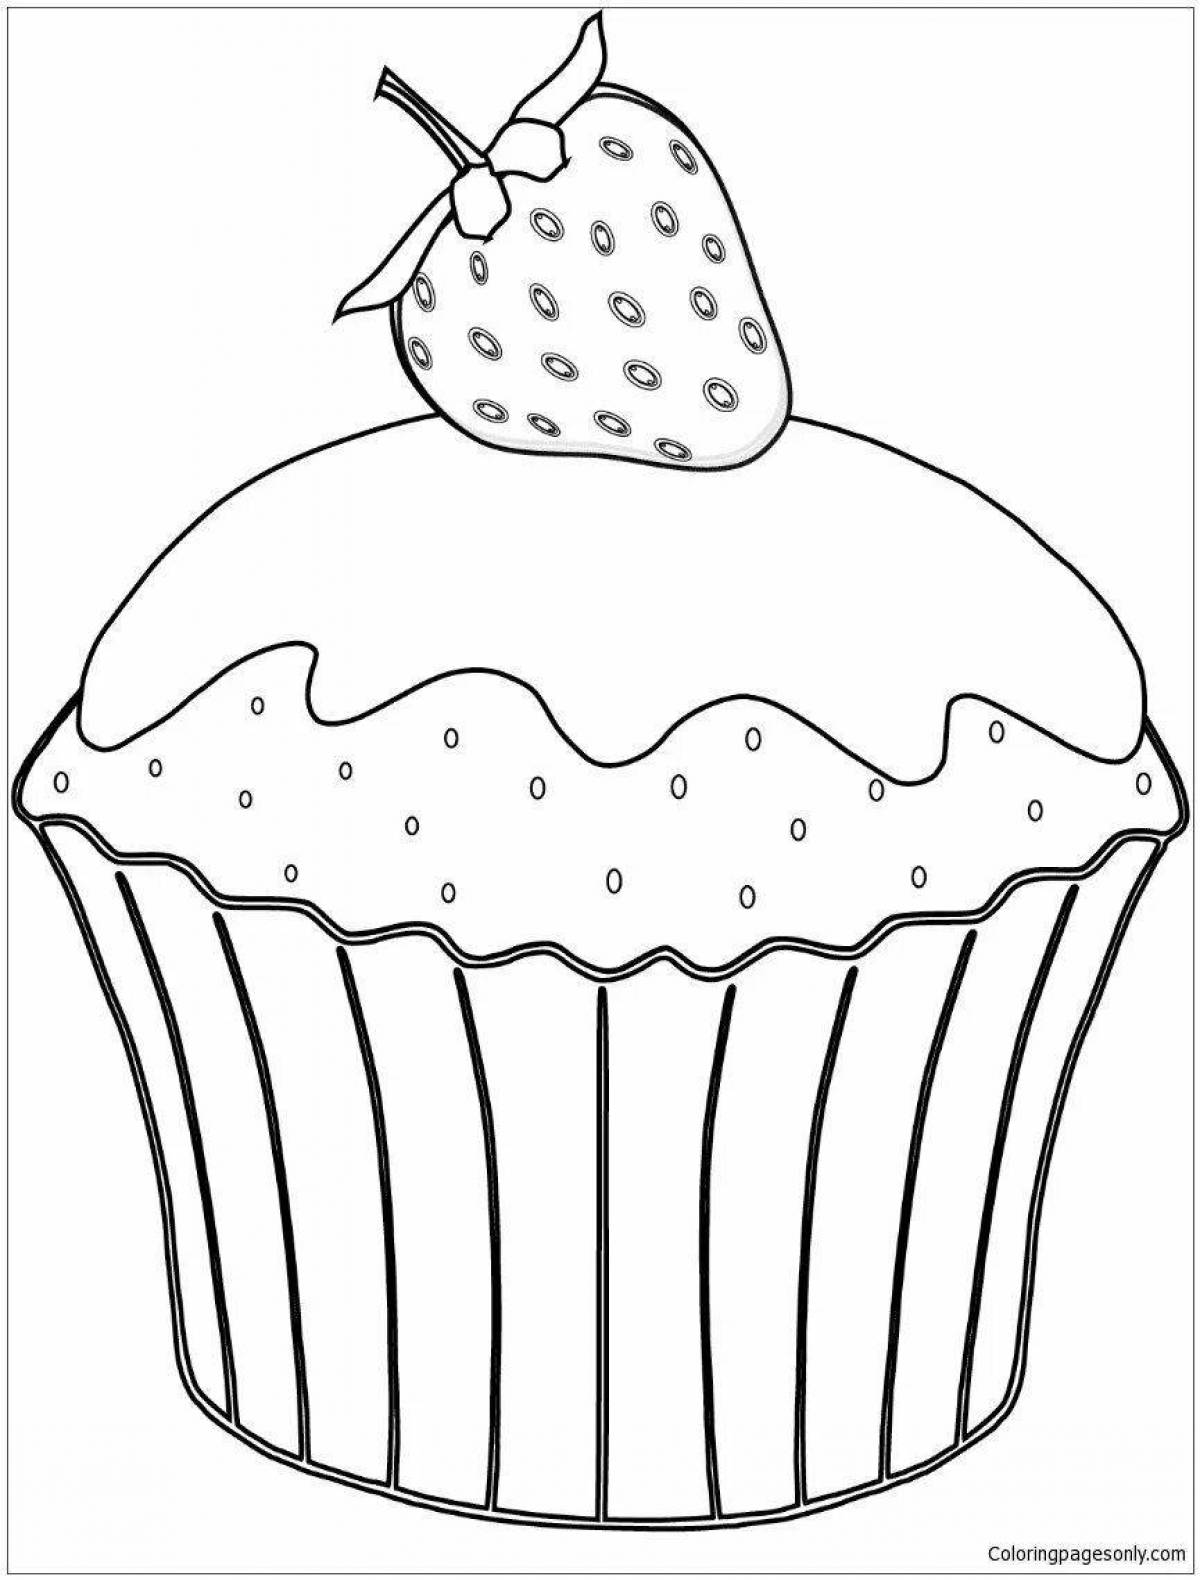 Birthday cake coloring page